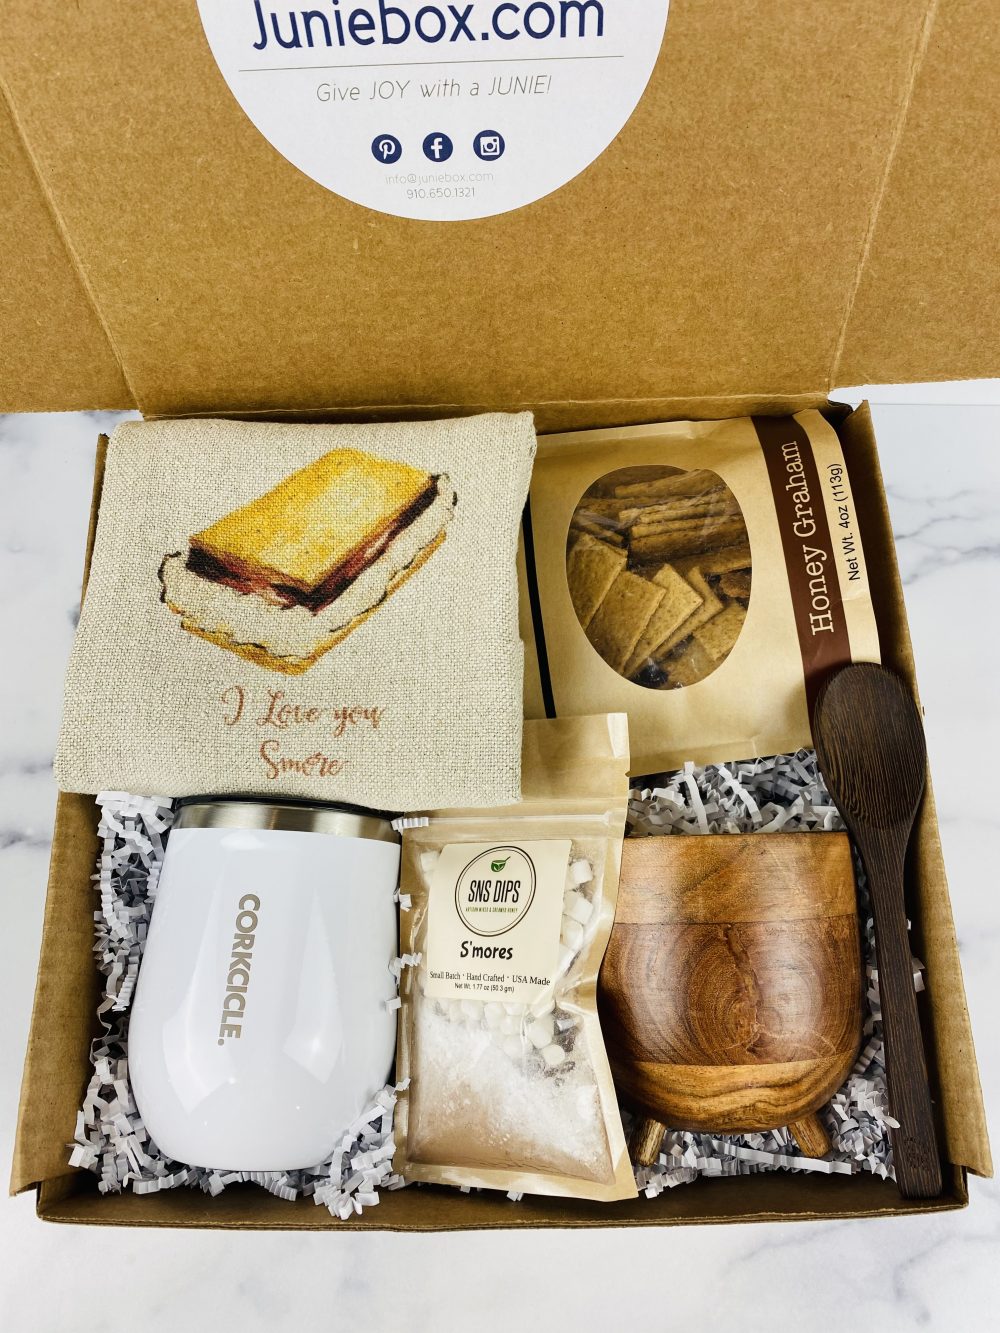 The “Love You S’more” Box